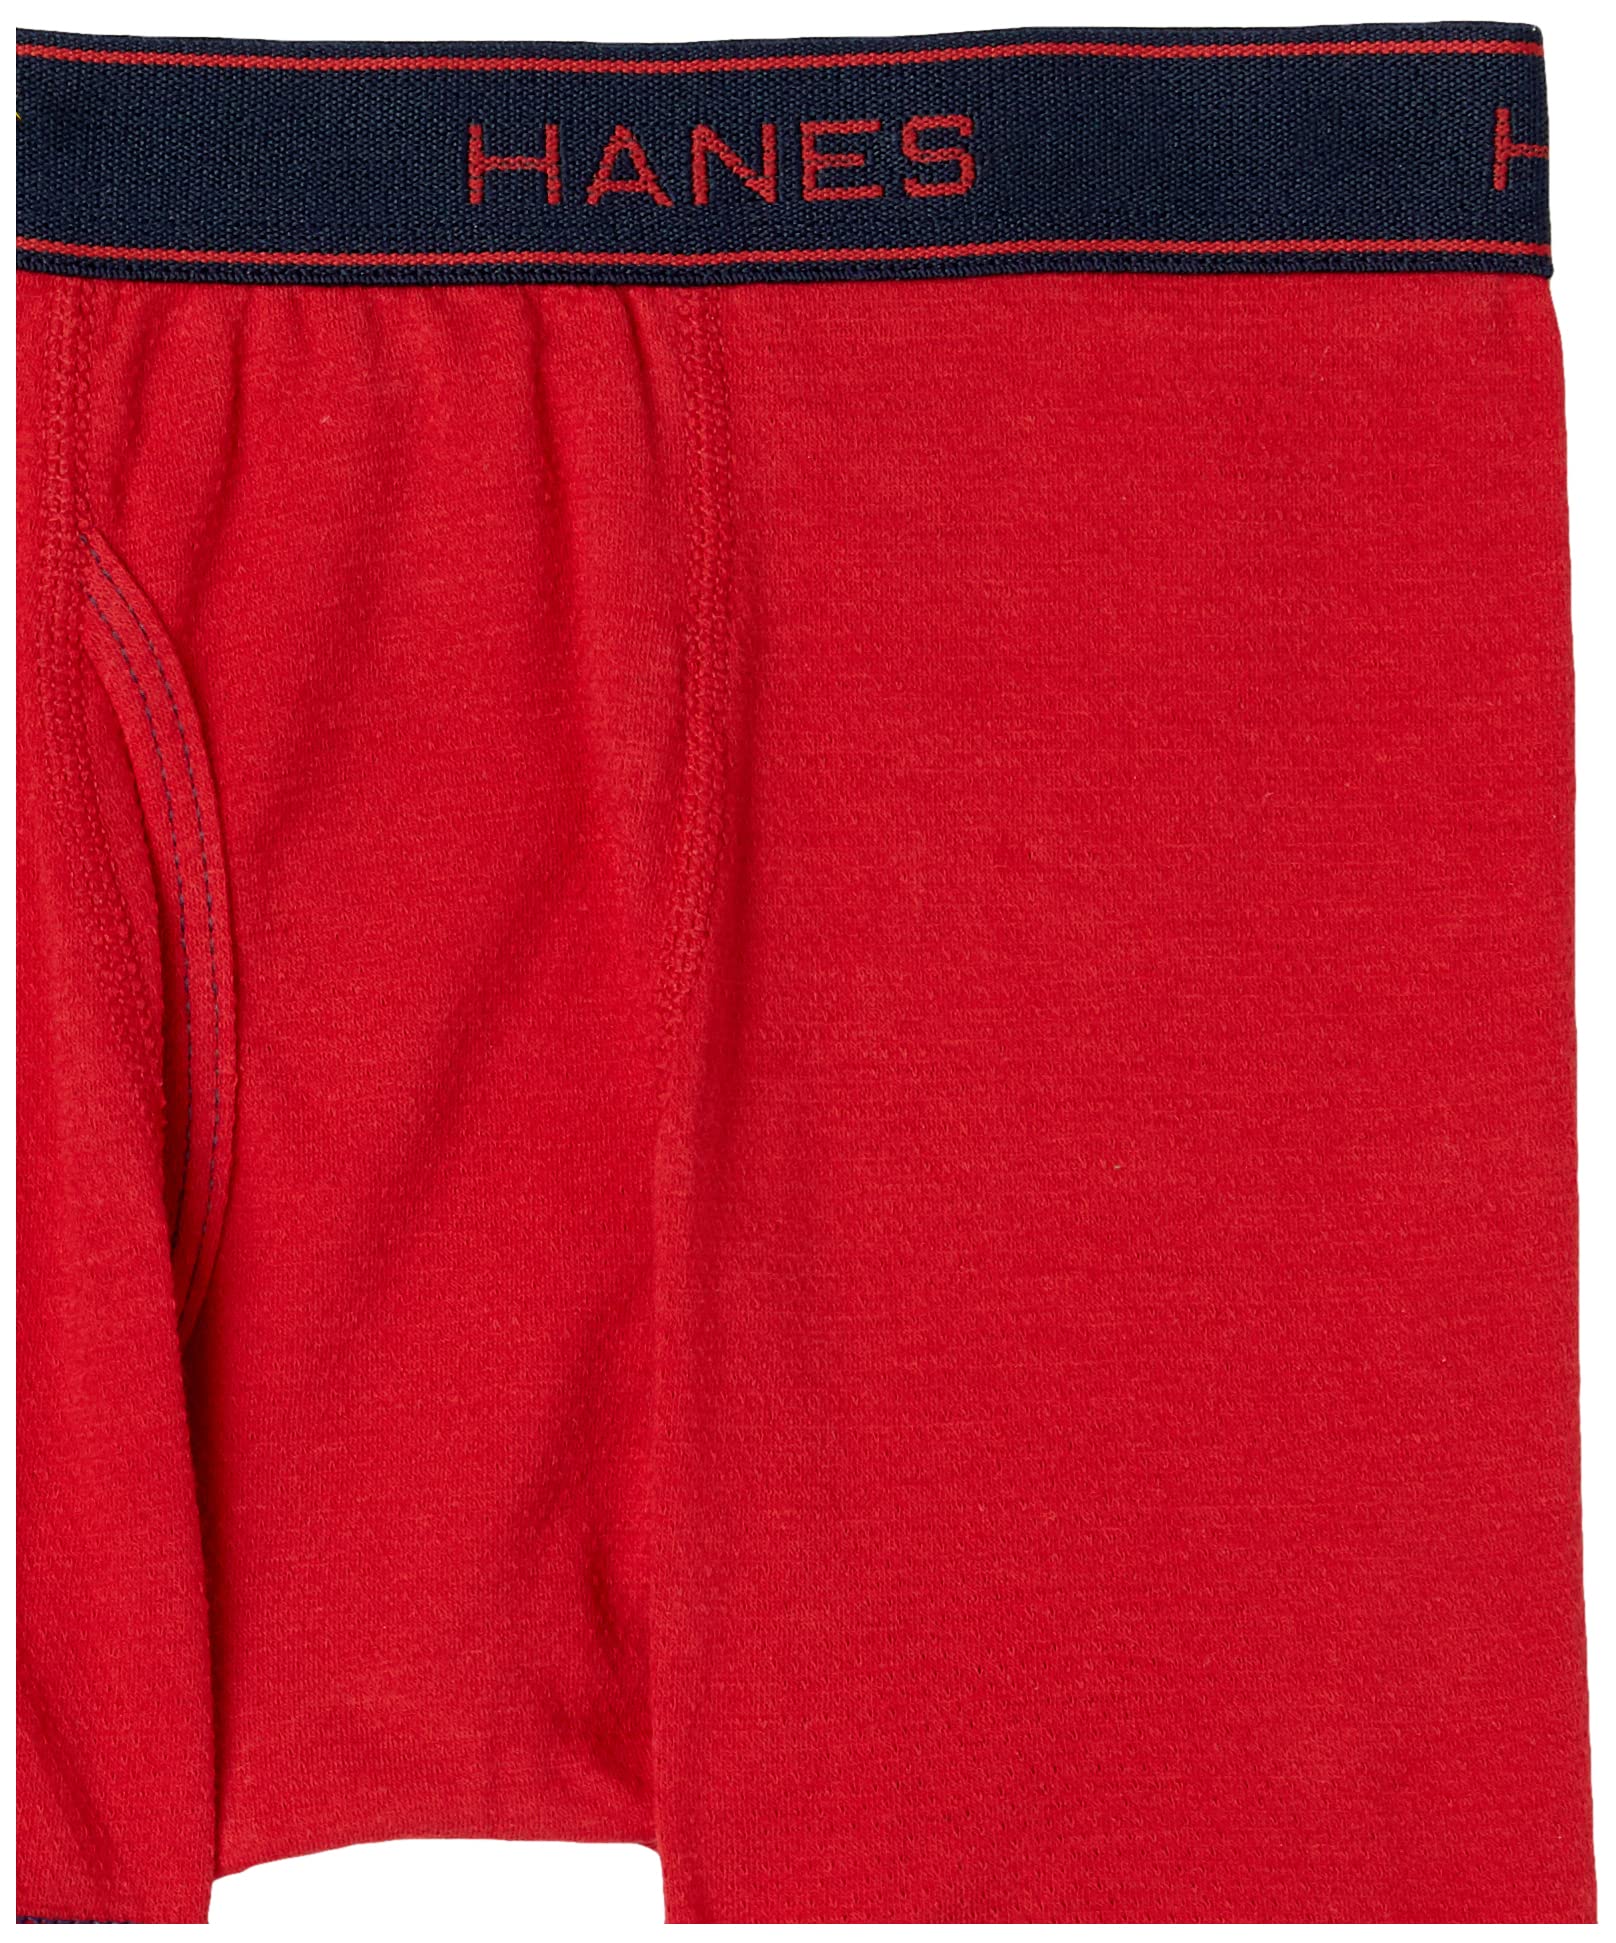 Hanes Boys' Underwear, Cool Comfort Stretch Mesh Boxer Briefs, 6-Pack, Blue Gray Assorted, XX-Large